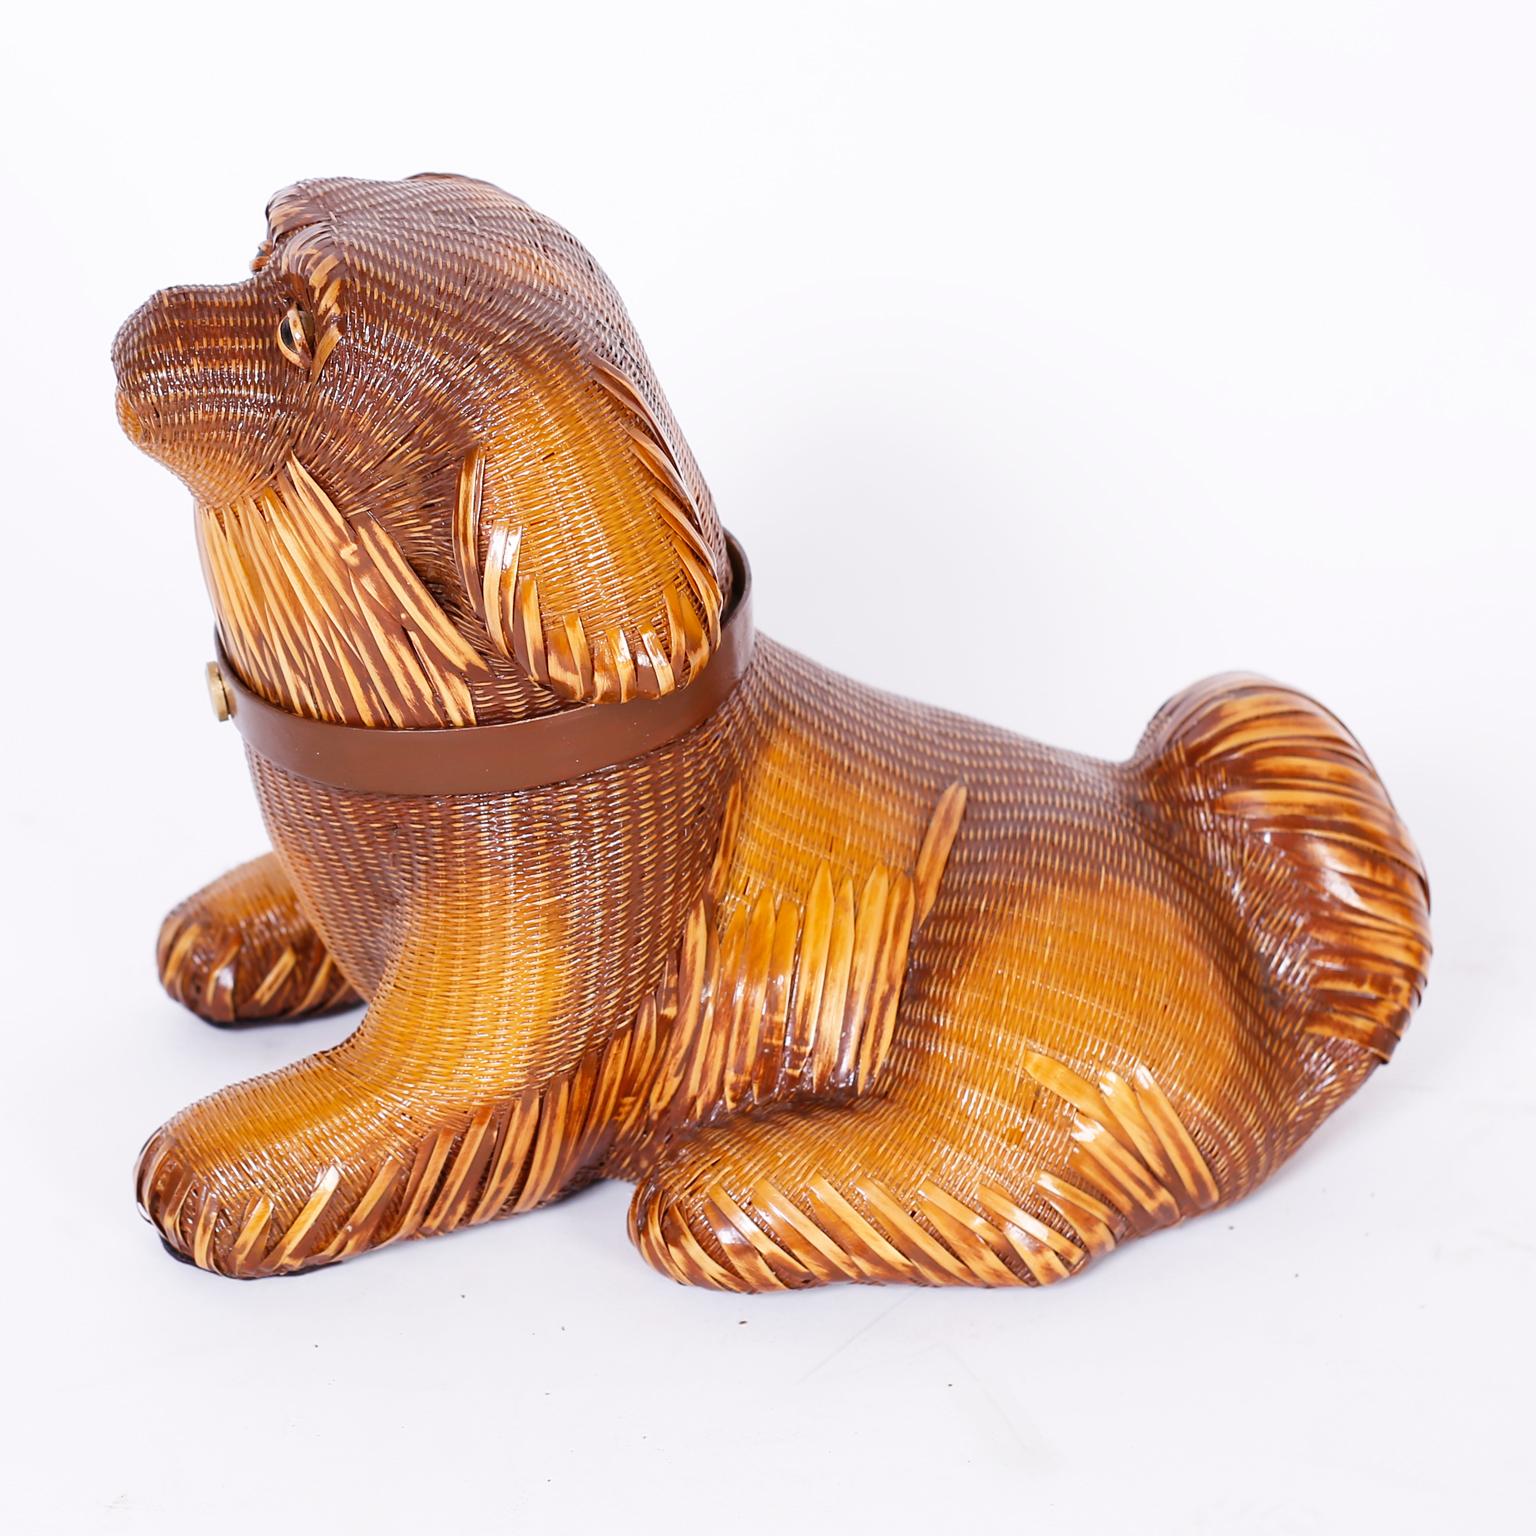 Charming midcentury wicker and reed dog from the noted Shanghai collection with its characteristic ambitious weave and removable head.